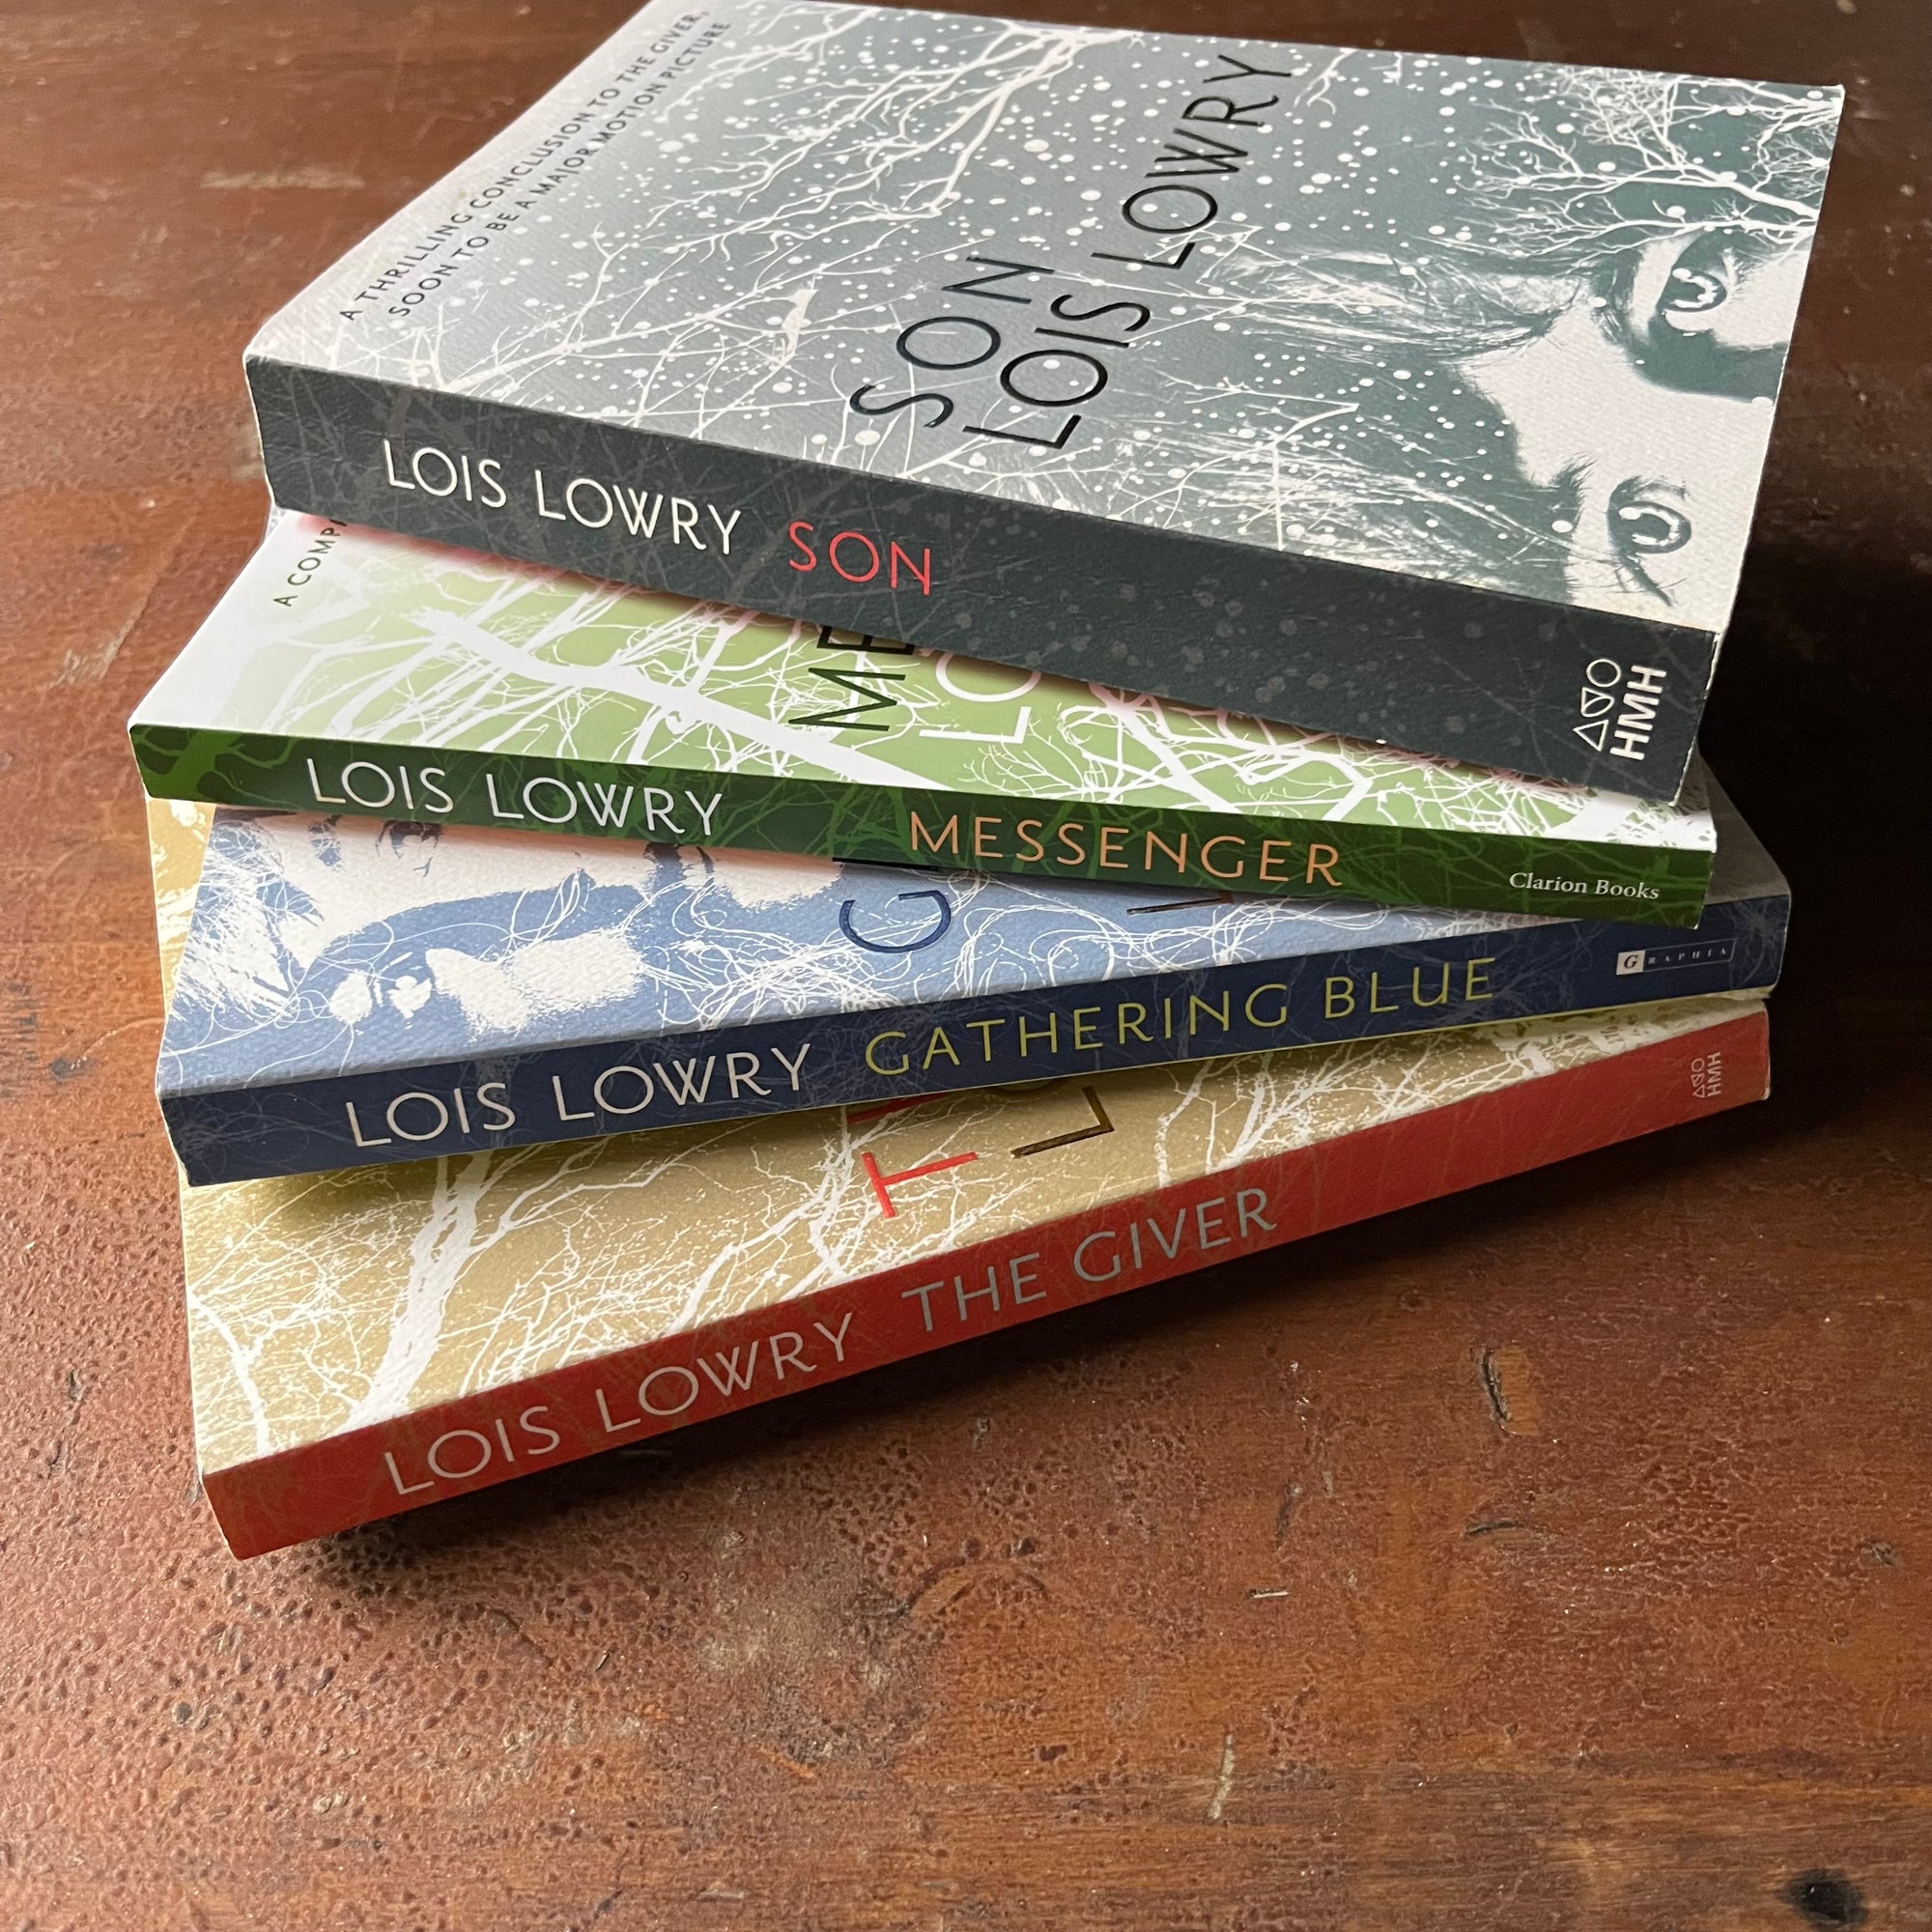 The Giver Quartet Book Set written by Lois Lowry-The Giver, Gathering Blue, Messenger, and Son-Newbery Award Winning Book-Dystopian Young Adult Science Fiction-view of the spines & partial view of the covers